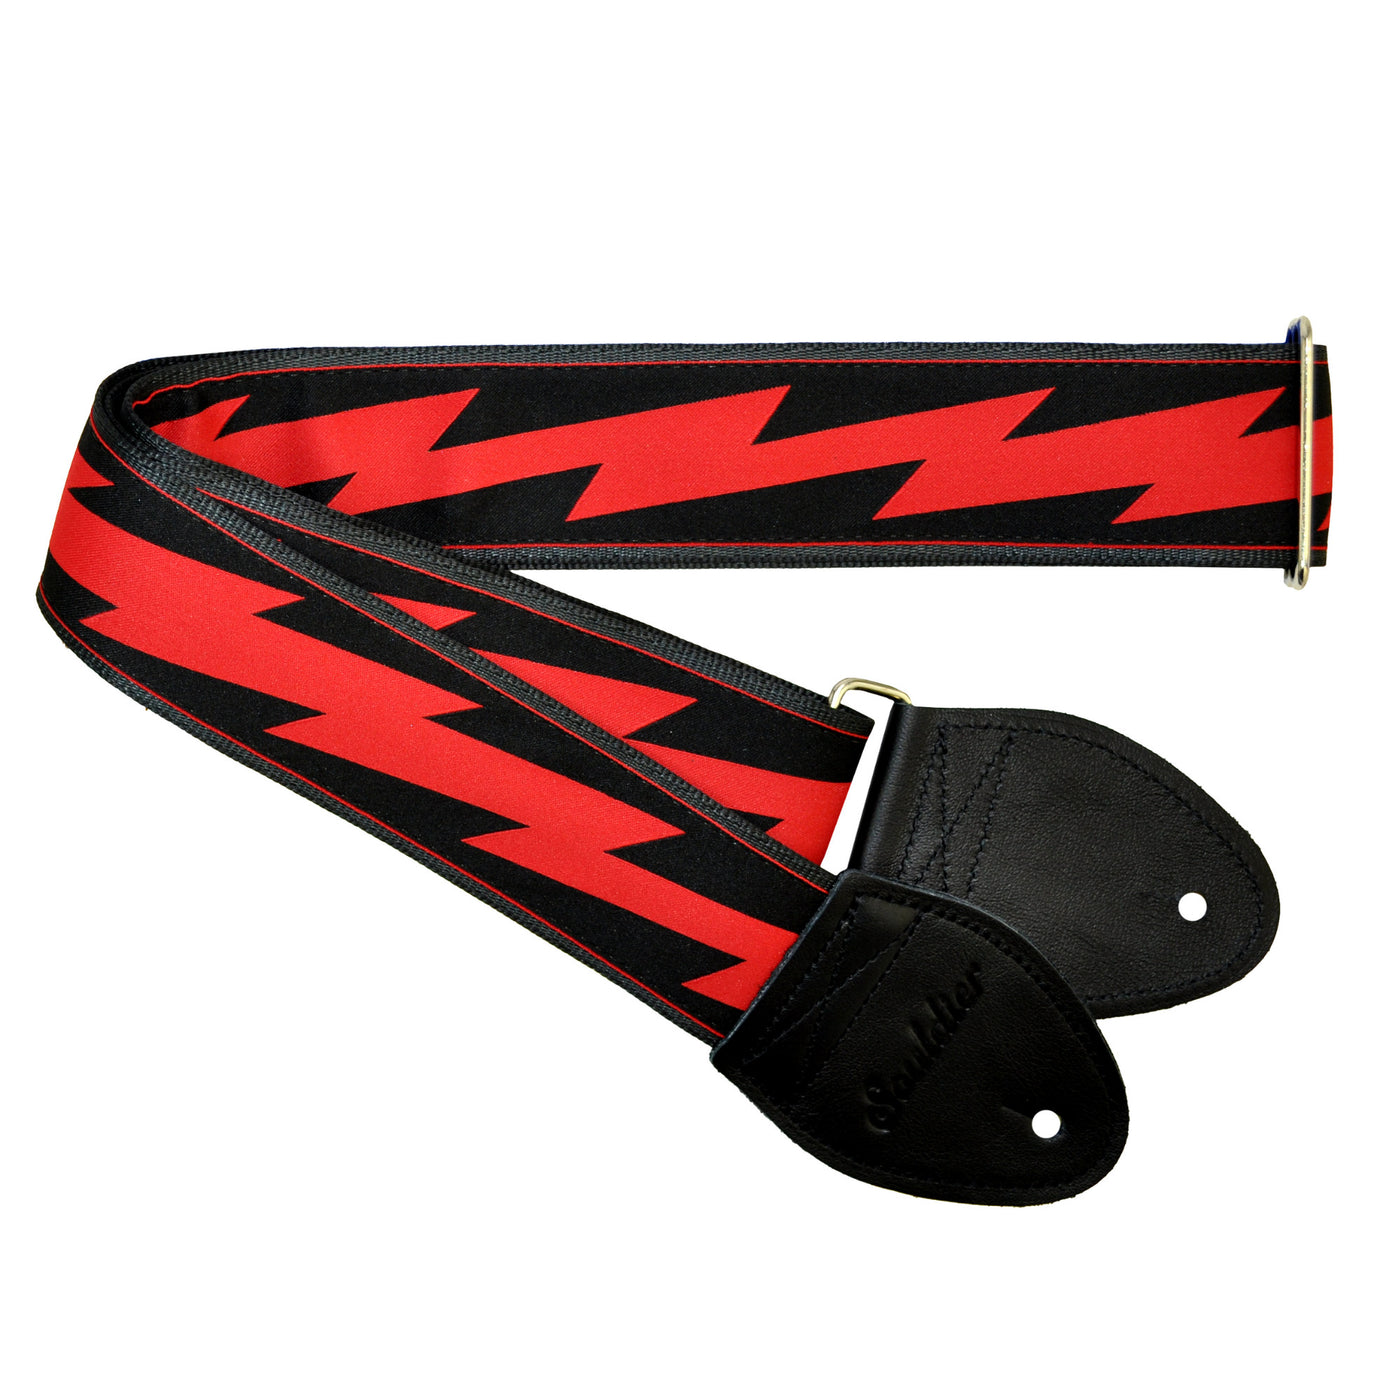 Souldier GS0858BK04BK - Handmade Seatbelt Guitar Strap for Bass, Electric or Acoustic Guitar, 2 Inches Wide and Adjustable Length from 30" to 63"  Made in the USA, Lightning Bolt, Red on Black